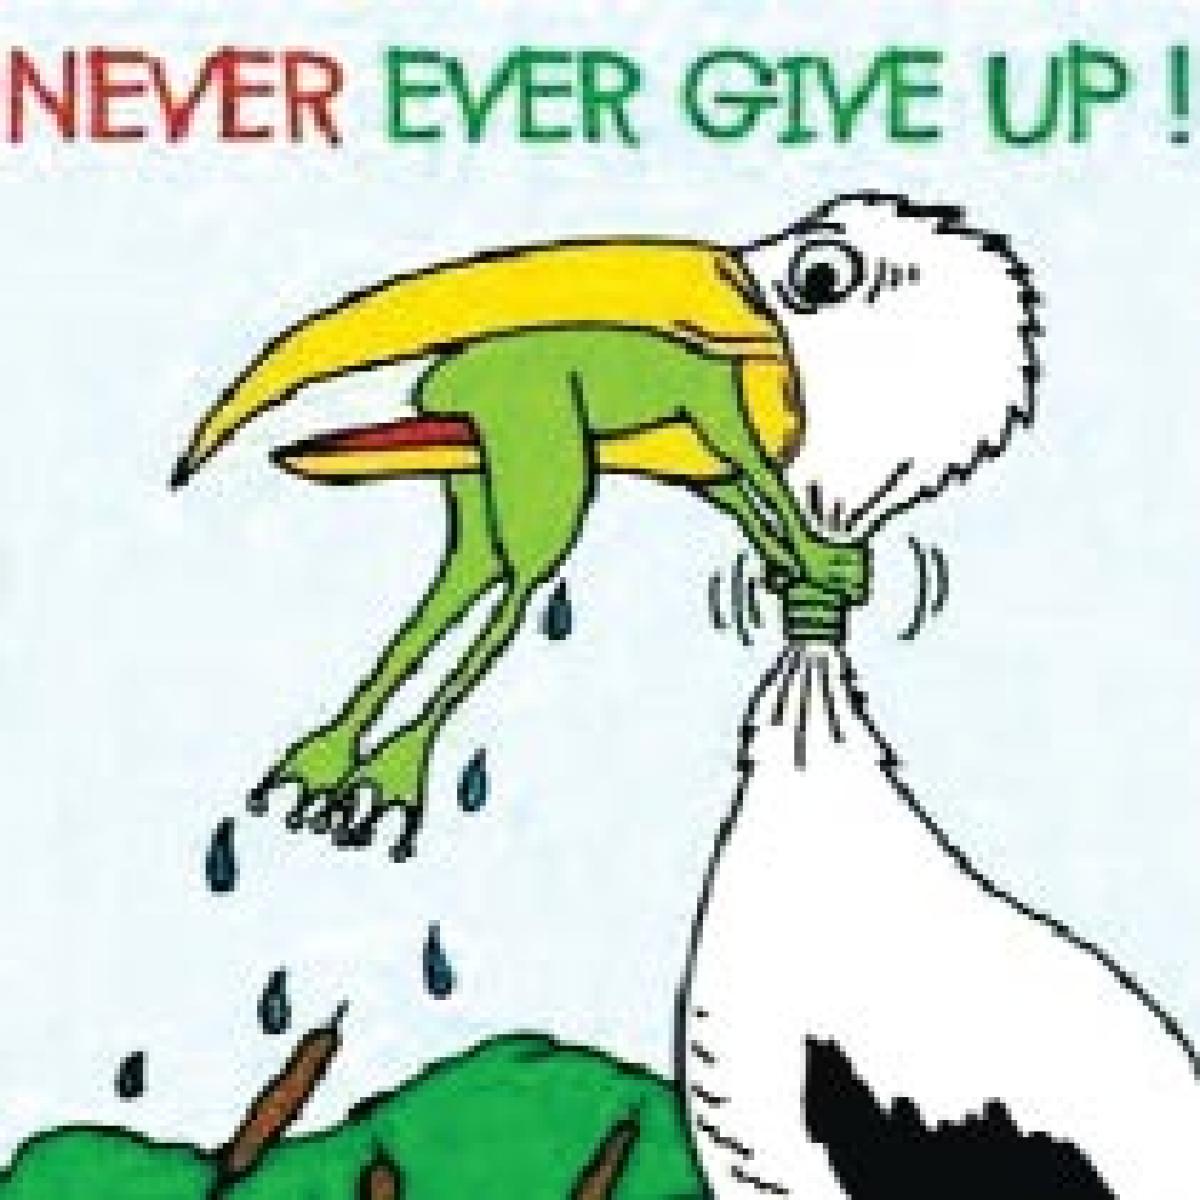 never never never give up